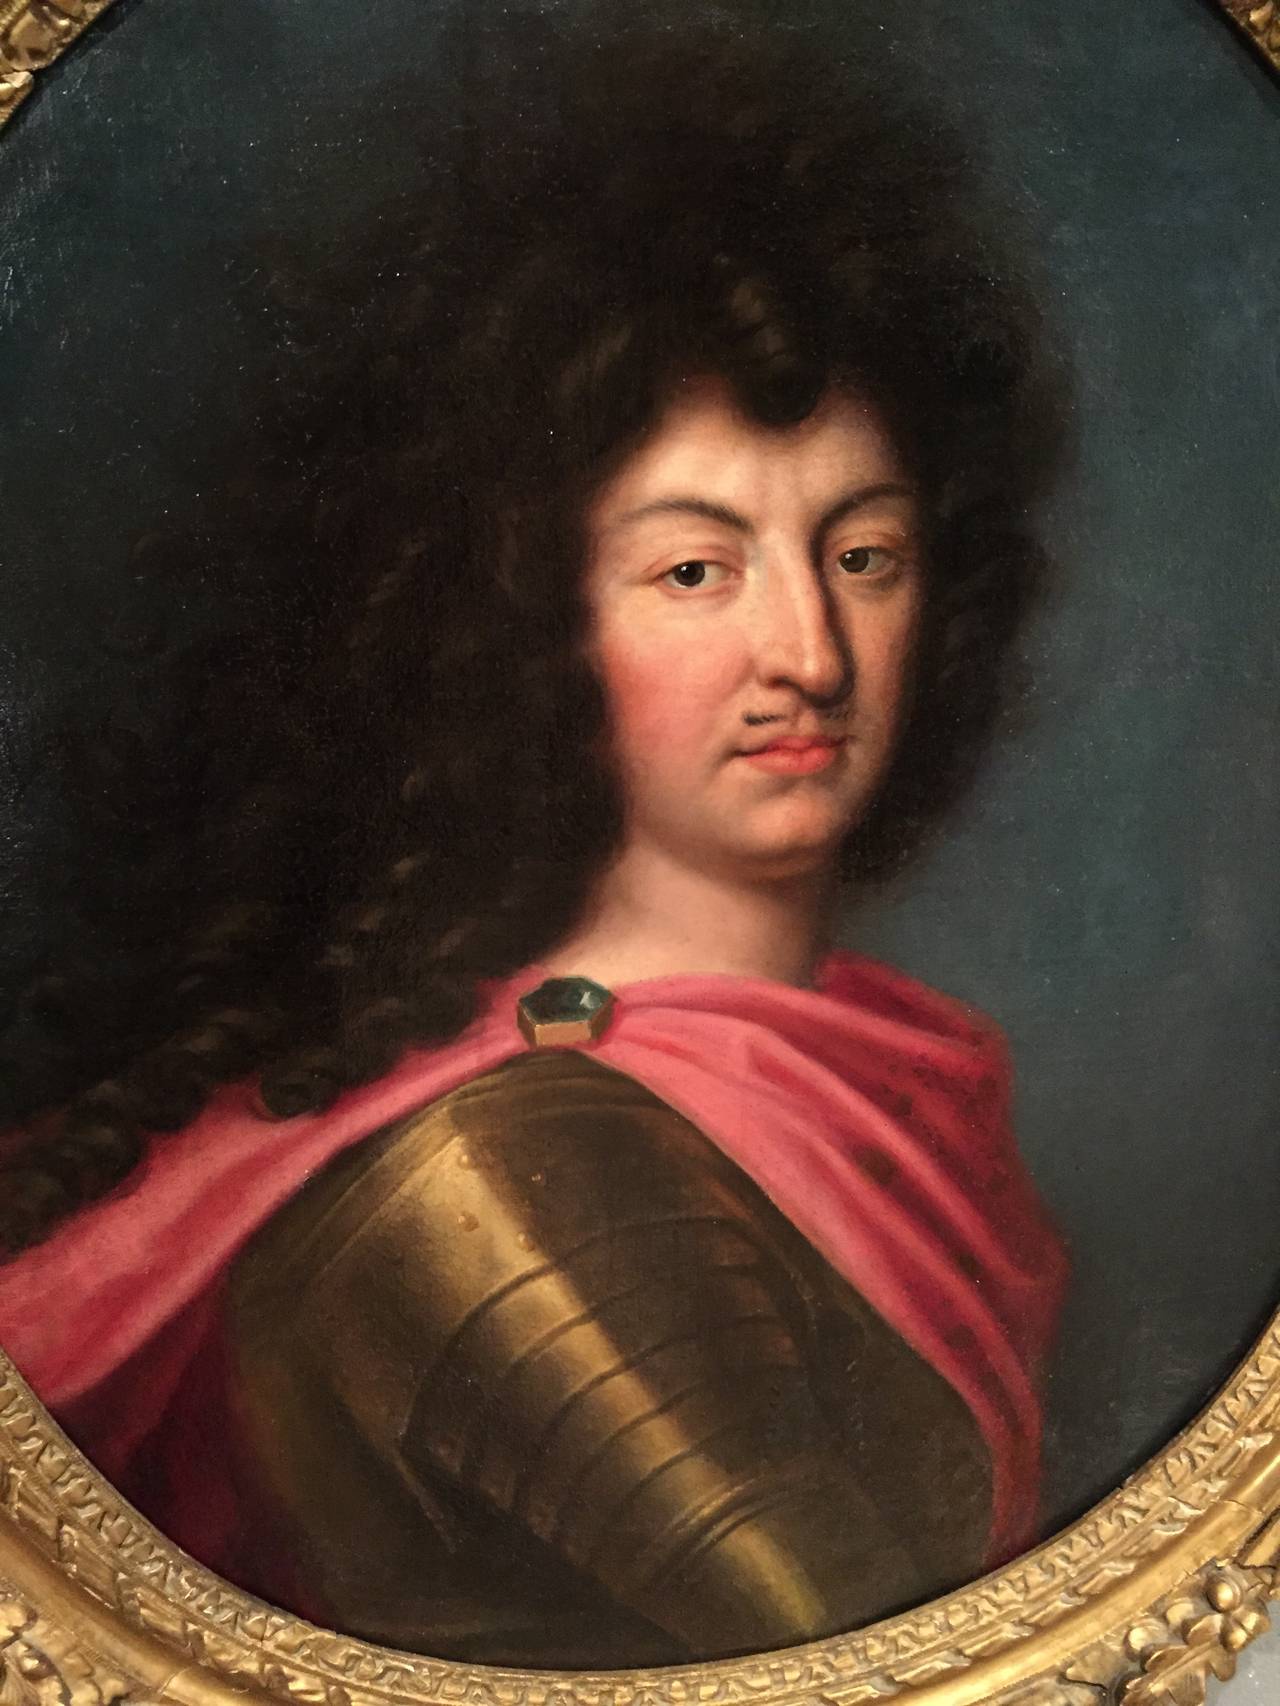 Louis XIV in Armor, Workshop of Pierre Mignard (1612-1695)
Louis XIV in Armor, Workshop of Pierre Mignard (1612-1695), French school circa 1670.

The portrait dates back to 1670, Louis XIV is represented in armor gold color symbolizing the solar